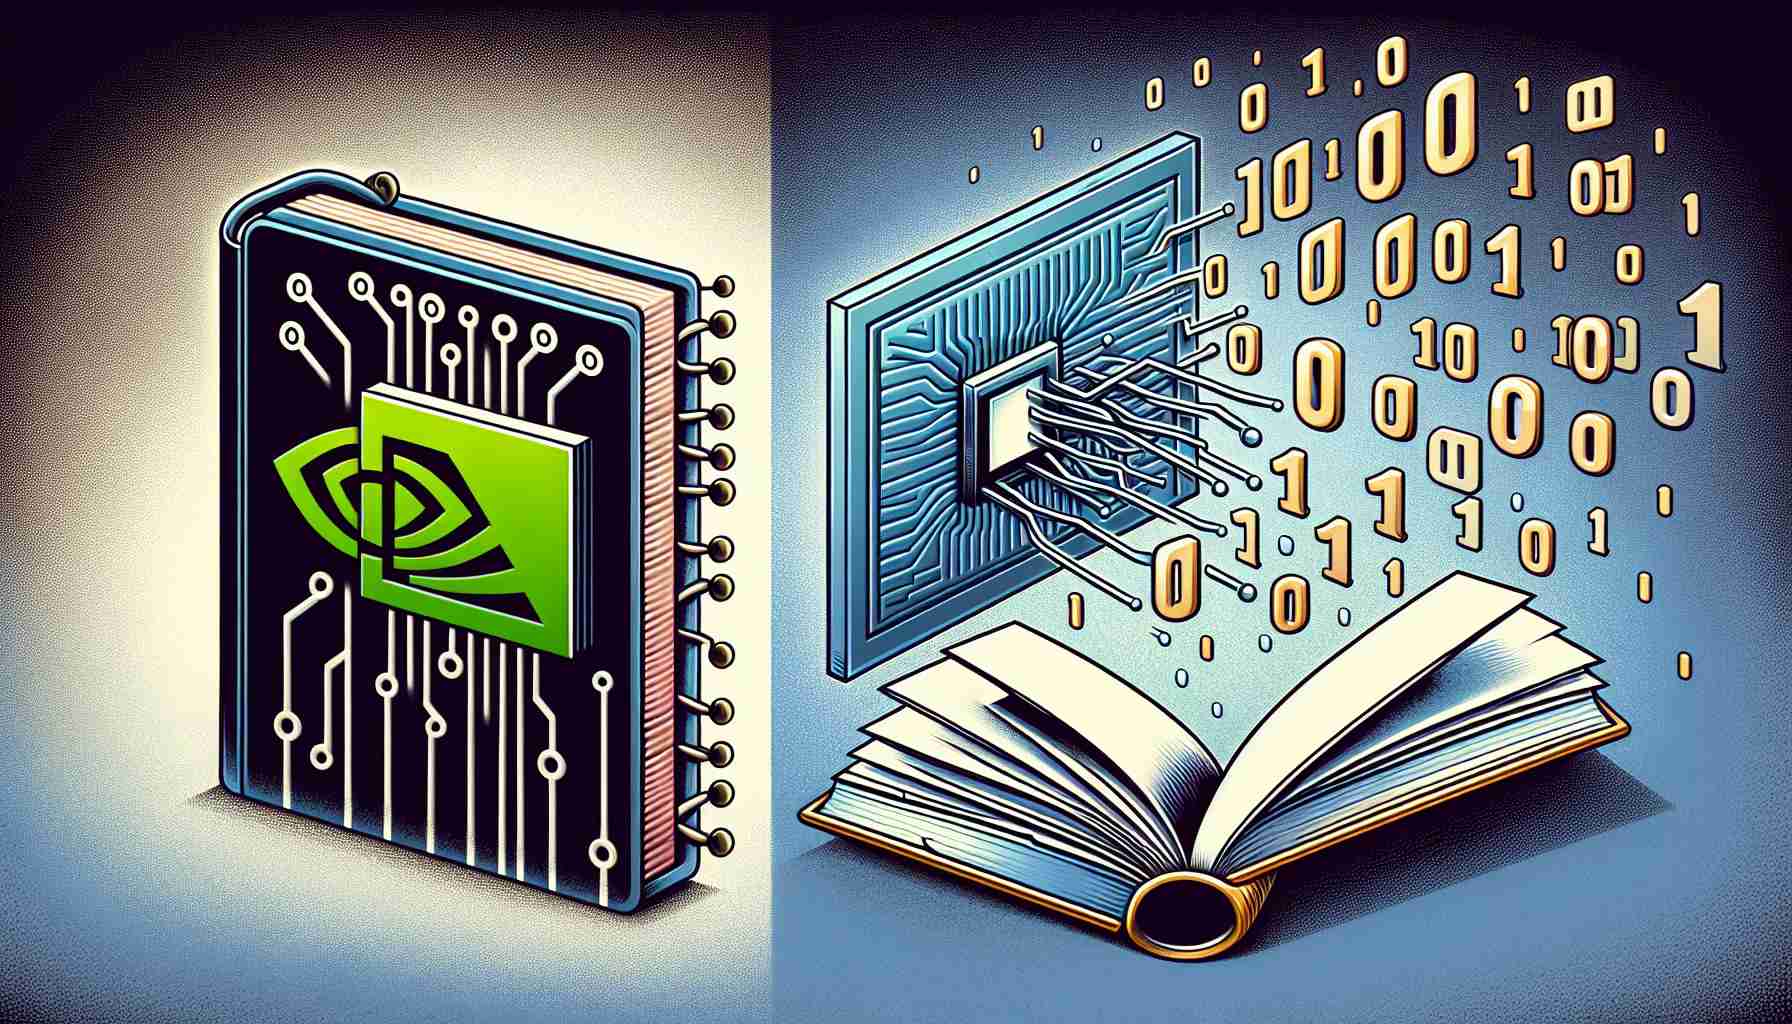 NVIDIA Faces Growing Competition as UXL Foundation Champions Open Standards in AI